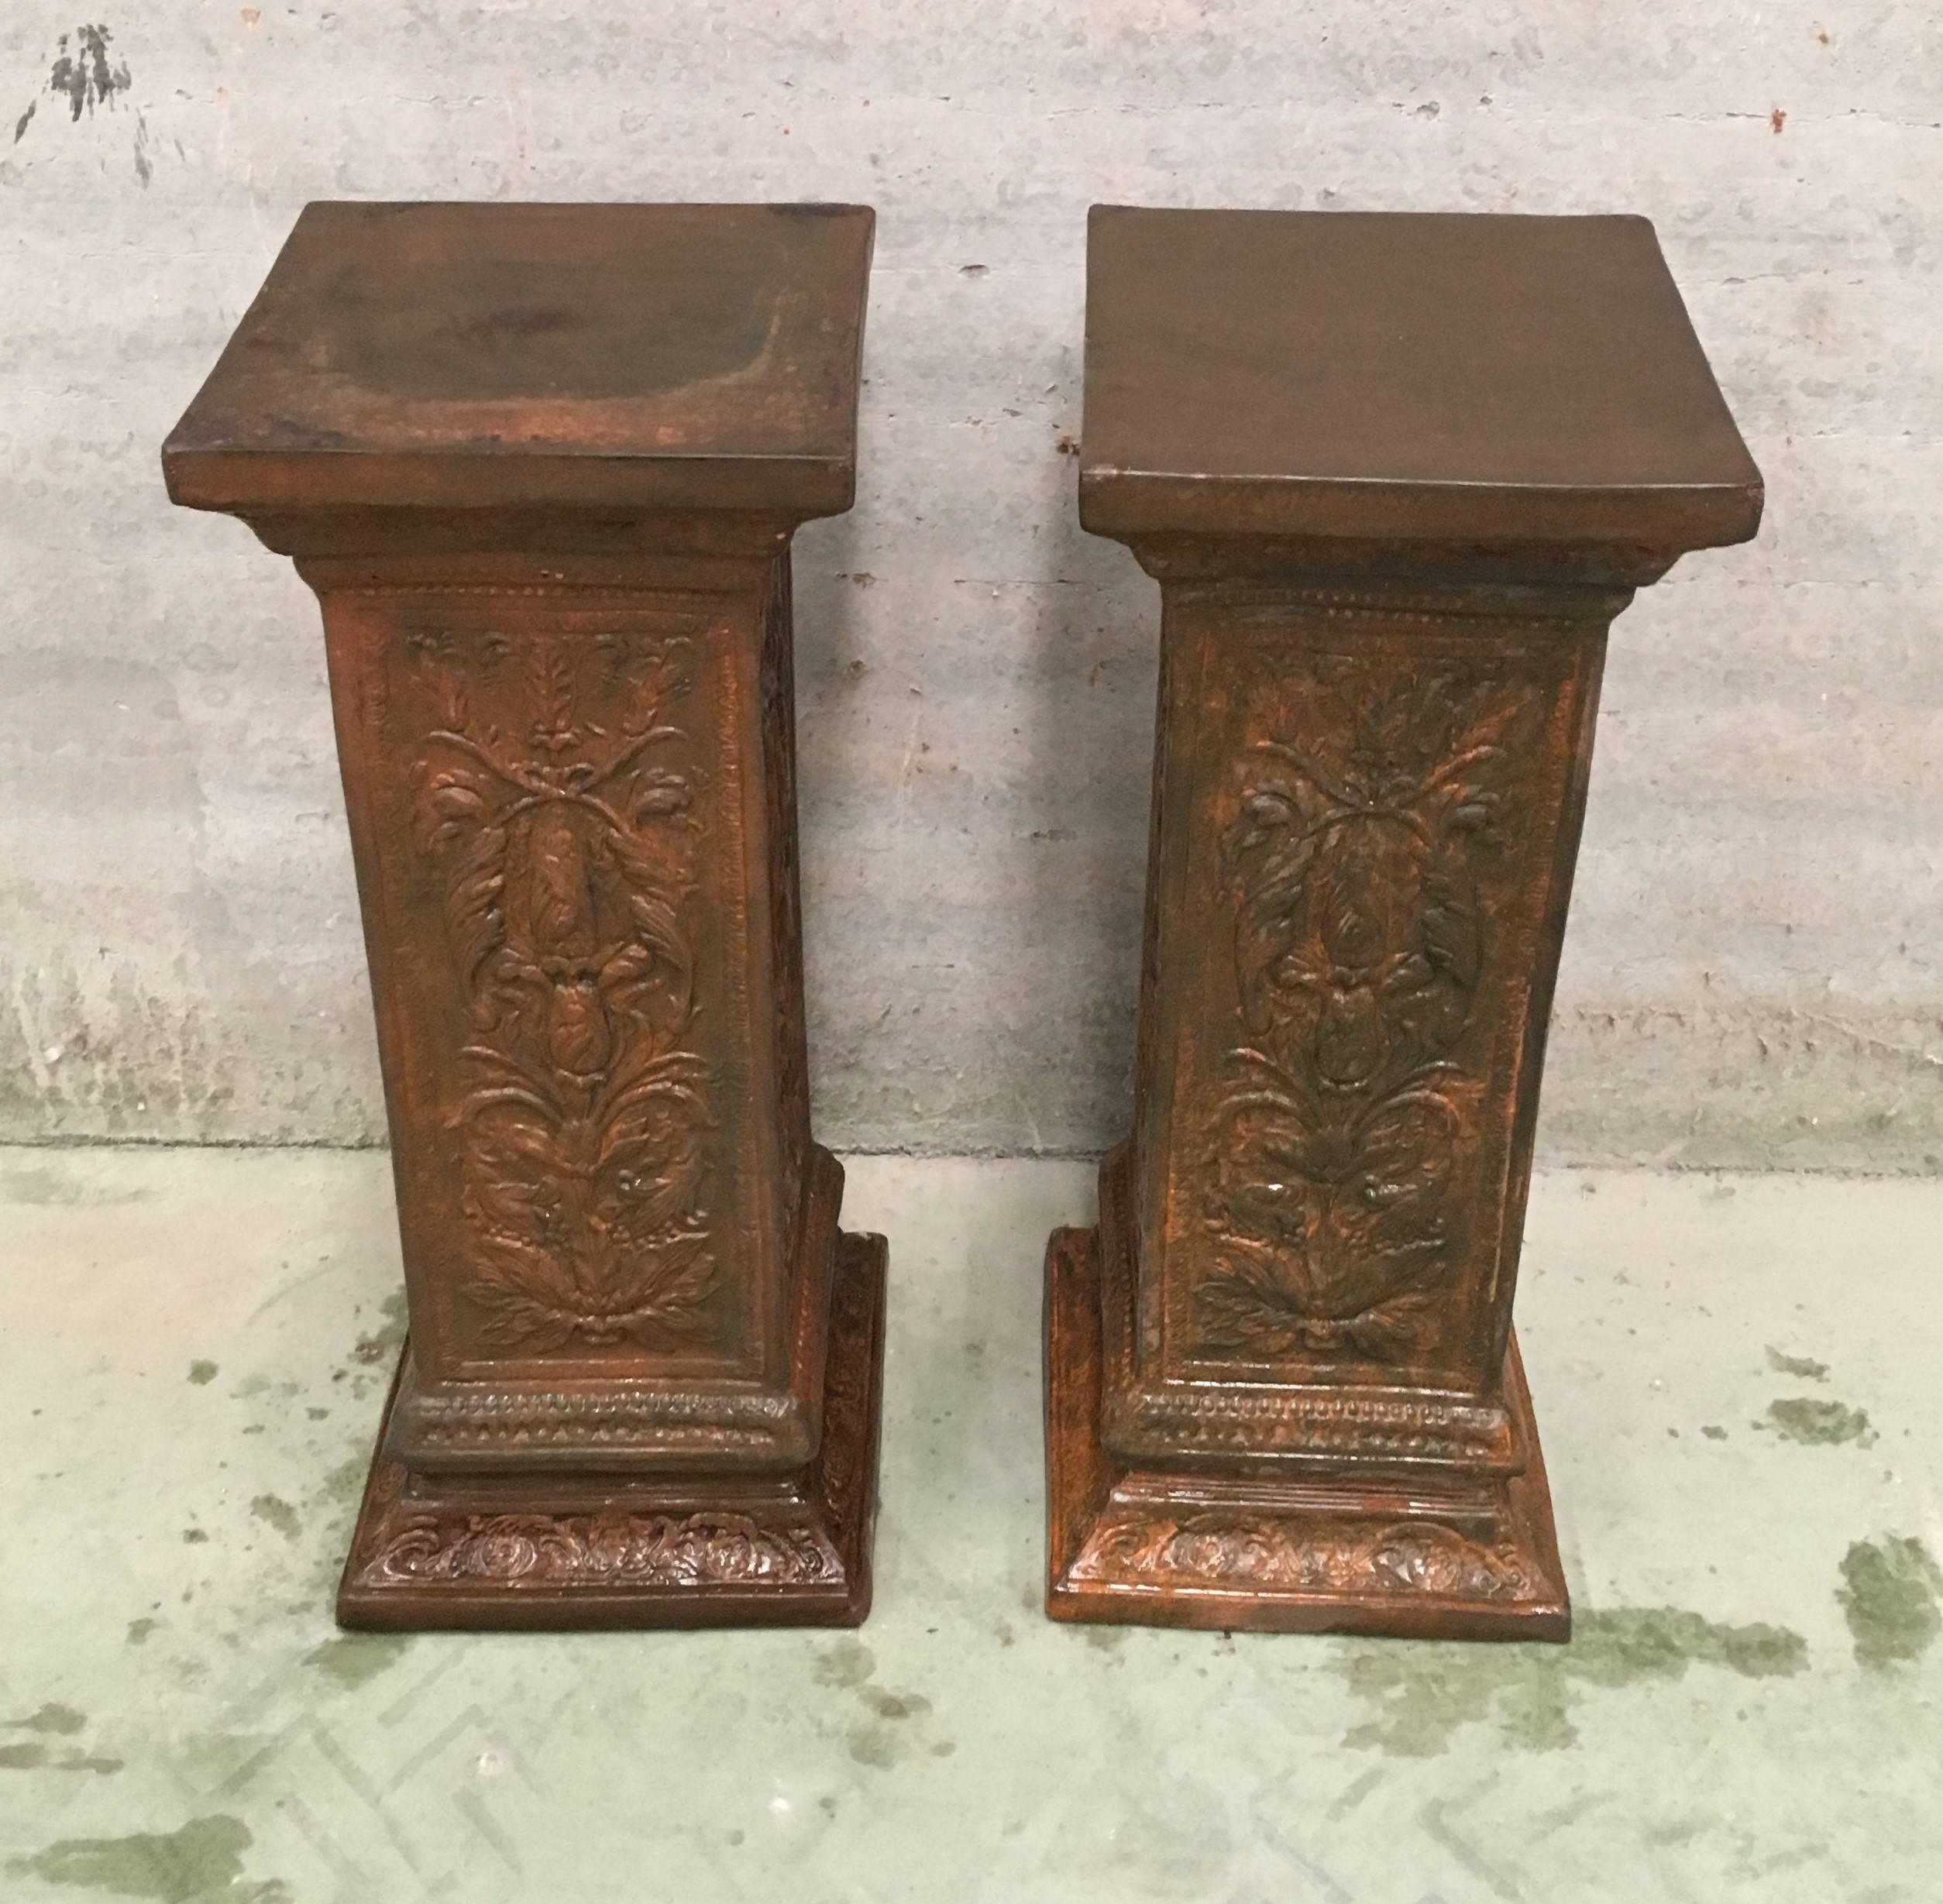 Neoclassical Revival 19th Pair of Columns or Pedestals in Glazed Handmade Terracotta